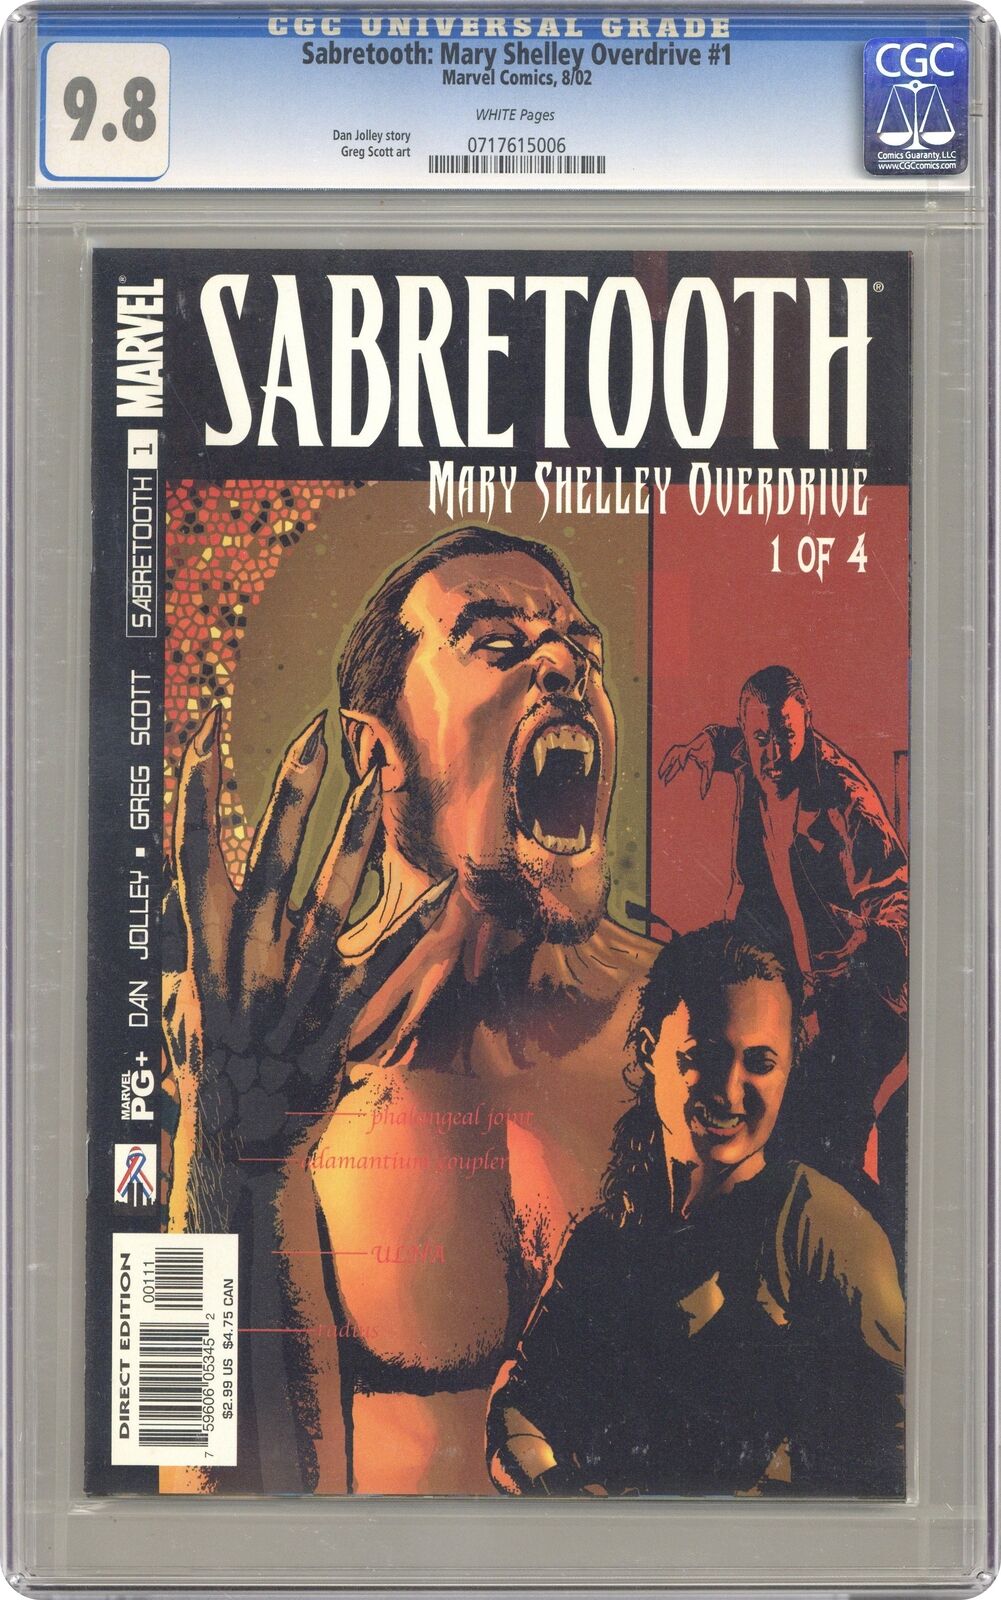 Sabretooth Mary Shelley Overdrive #1 CGC 9.8 2002 0717615006